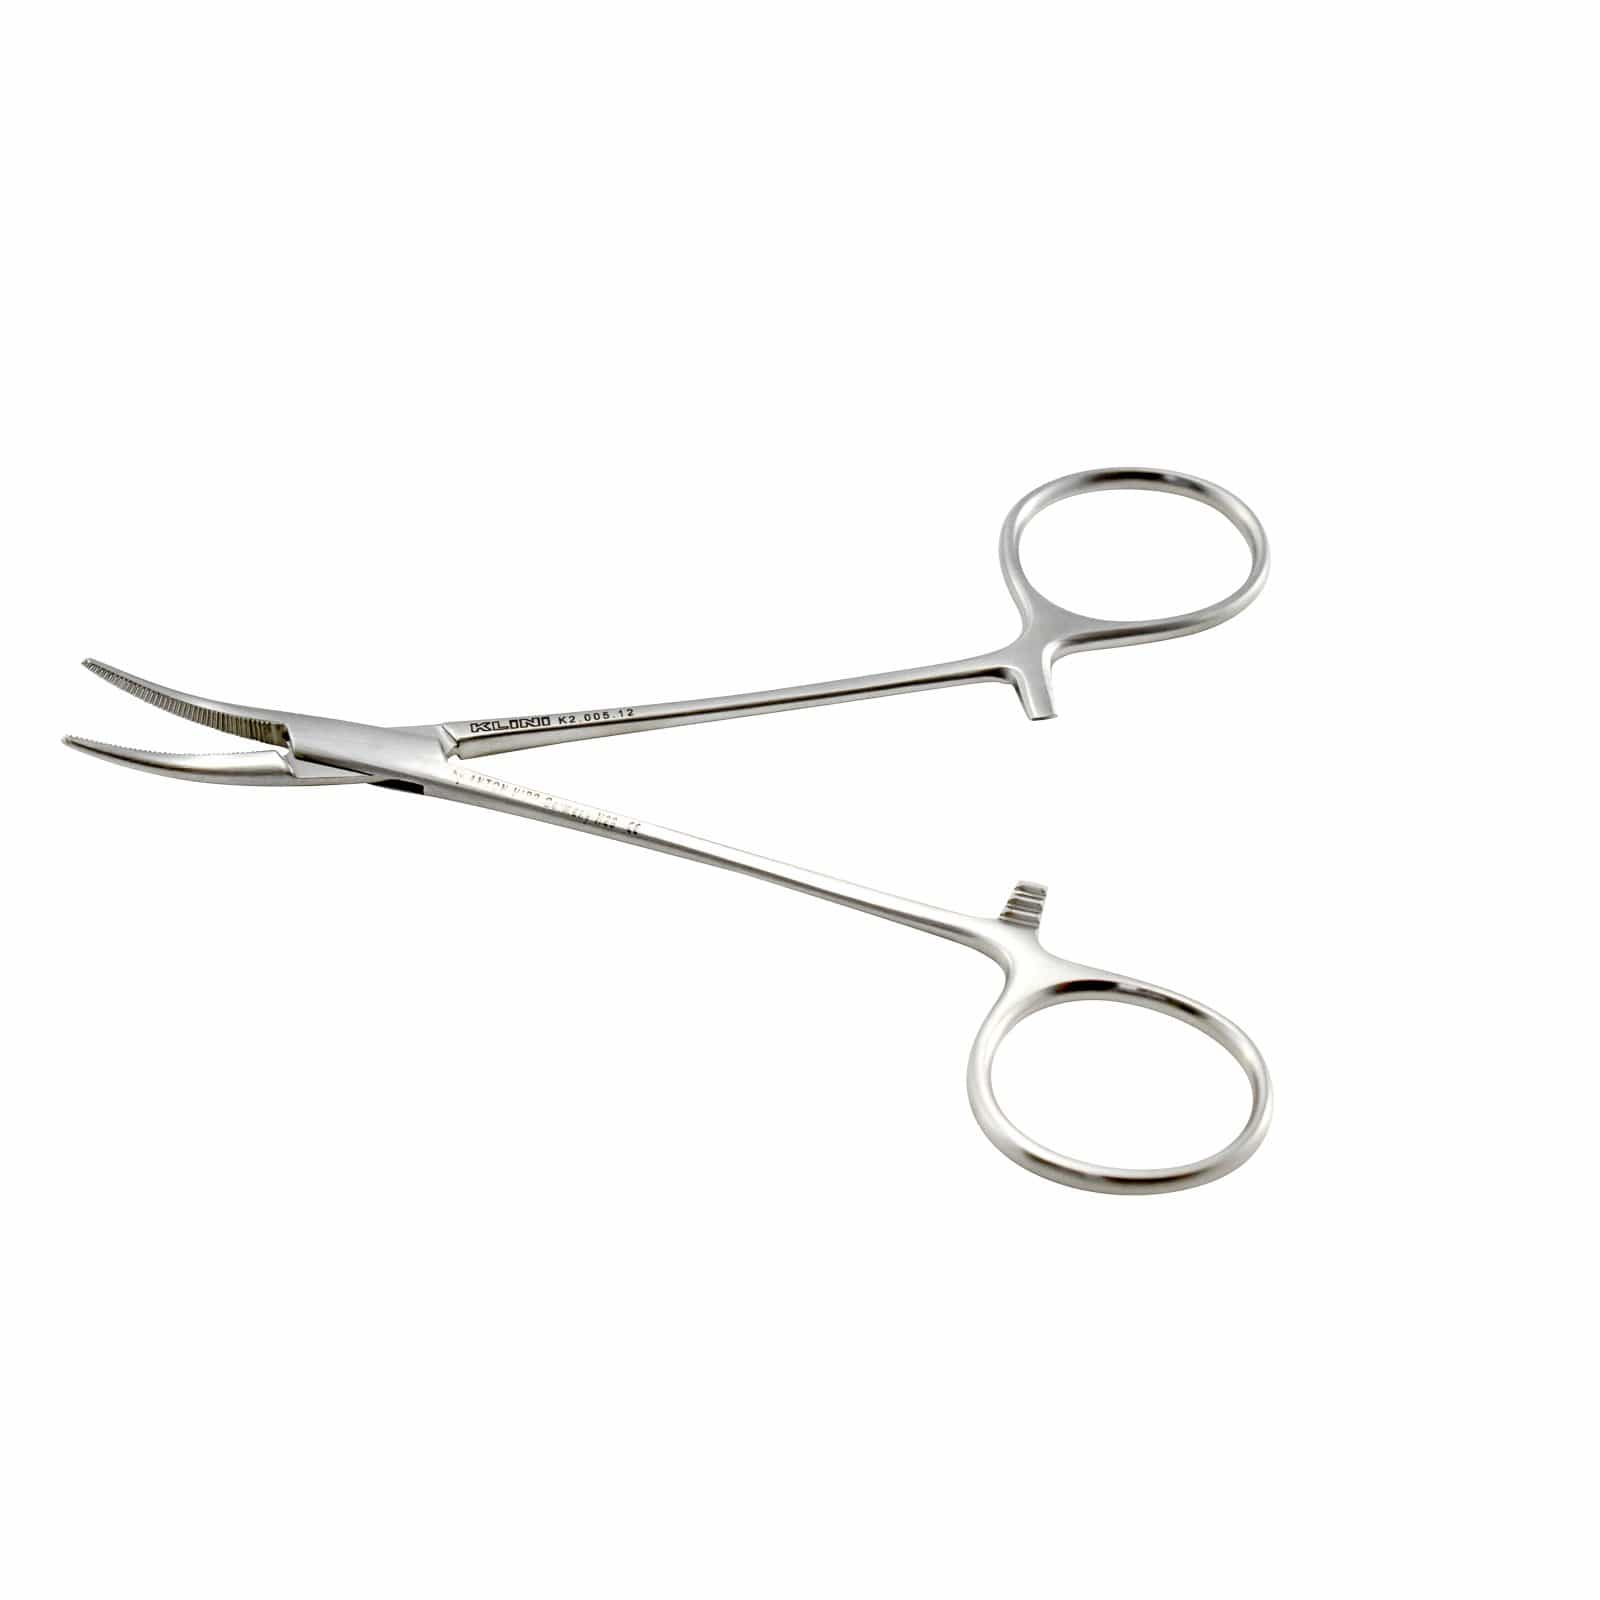 Klini Surgical Instruments 12.5cm / Curved / Standard Klini Halsted Mosquito Forceps